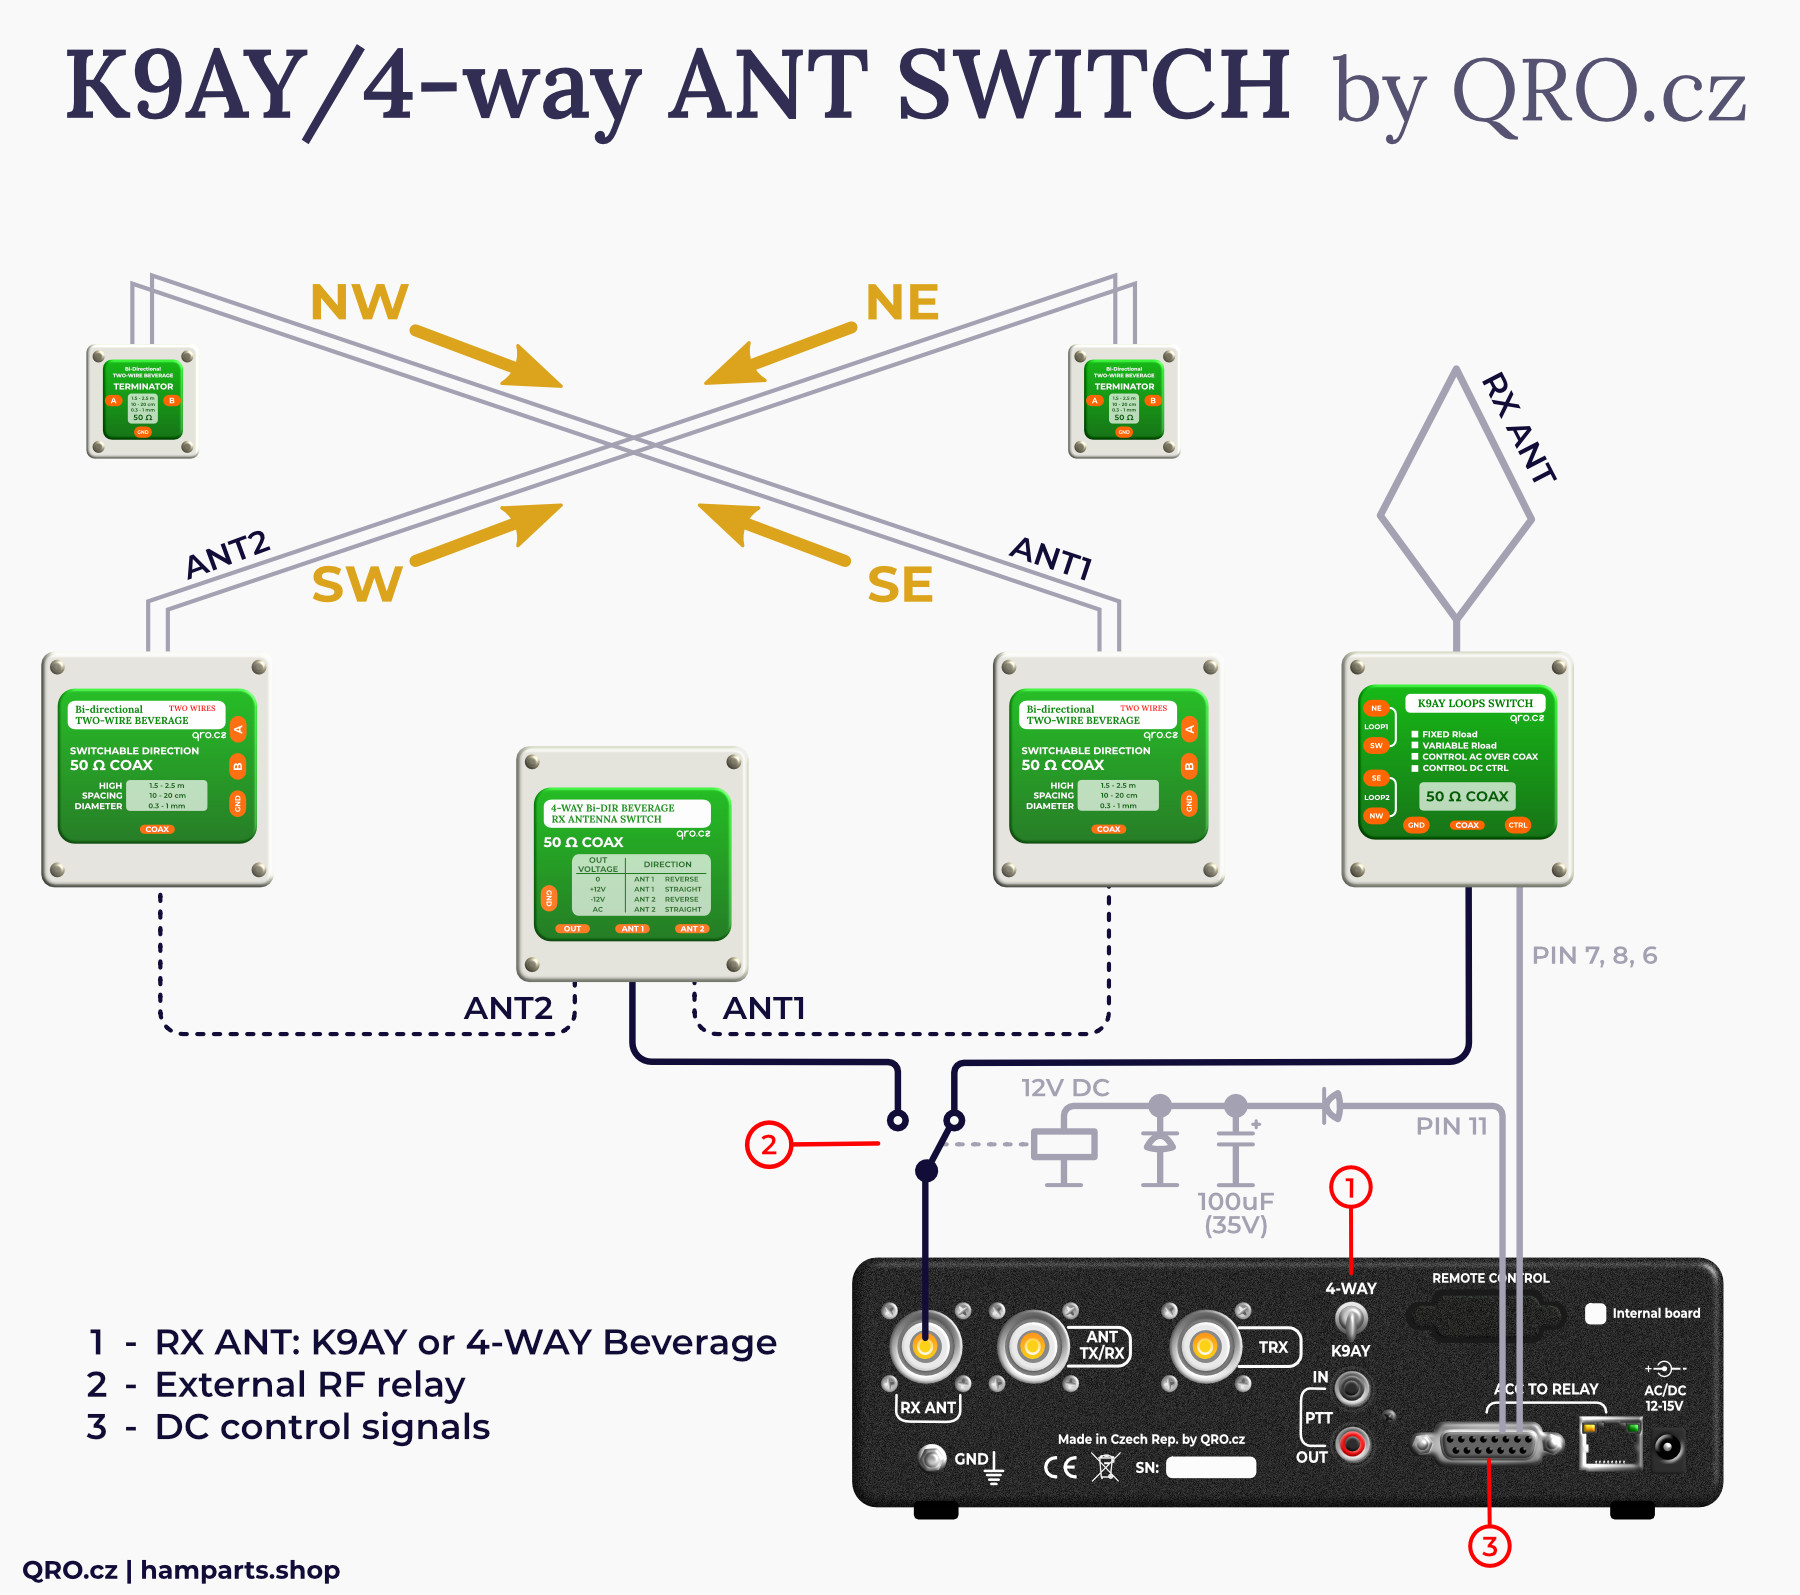 k9ay/4-way controller with k9ay simply loops switch and 4-way system by qro.cz hamparts.shop